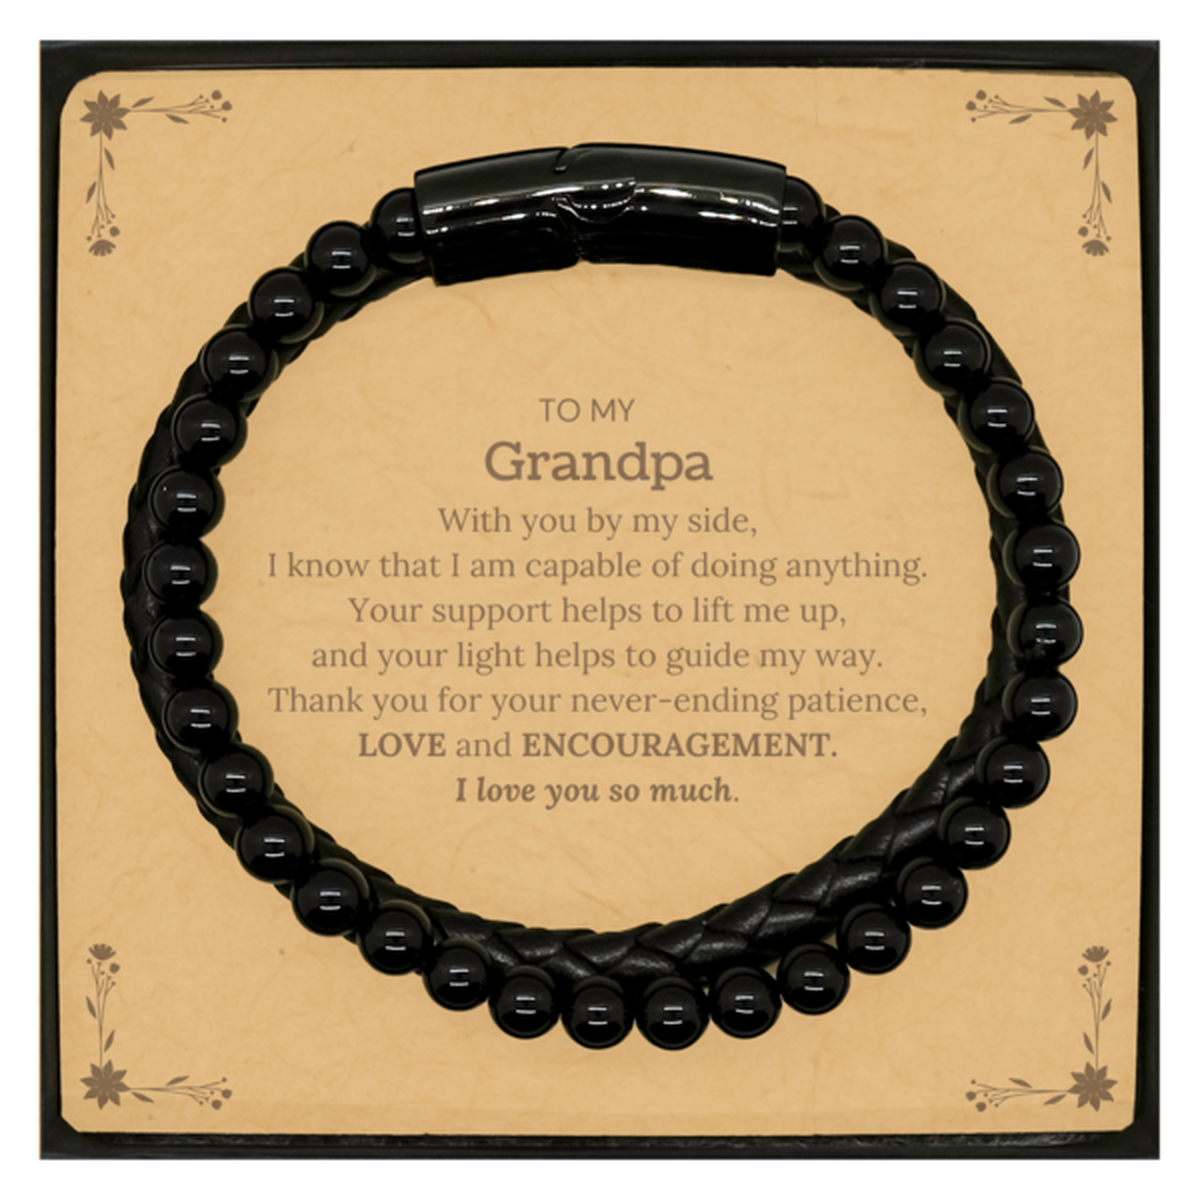 Appreciation Grandpa Stone Leather Bracelets Gifts, To My Grandpa Birthday Christmas Wedding Keepsake Gifts for Grandpa With you by my side, I know that I am capable of doing anything. I love you so much